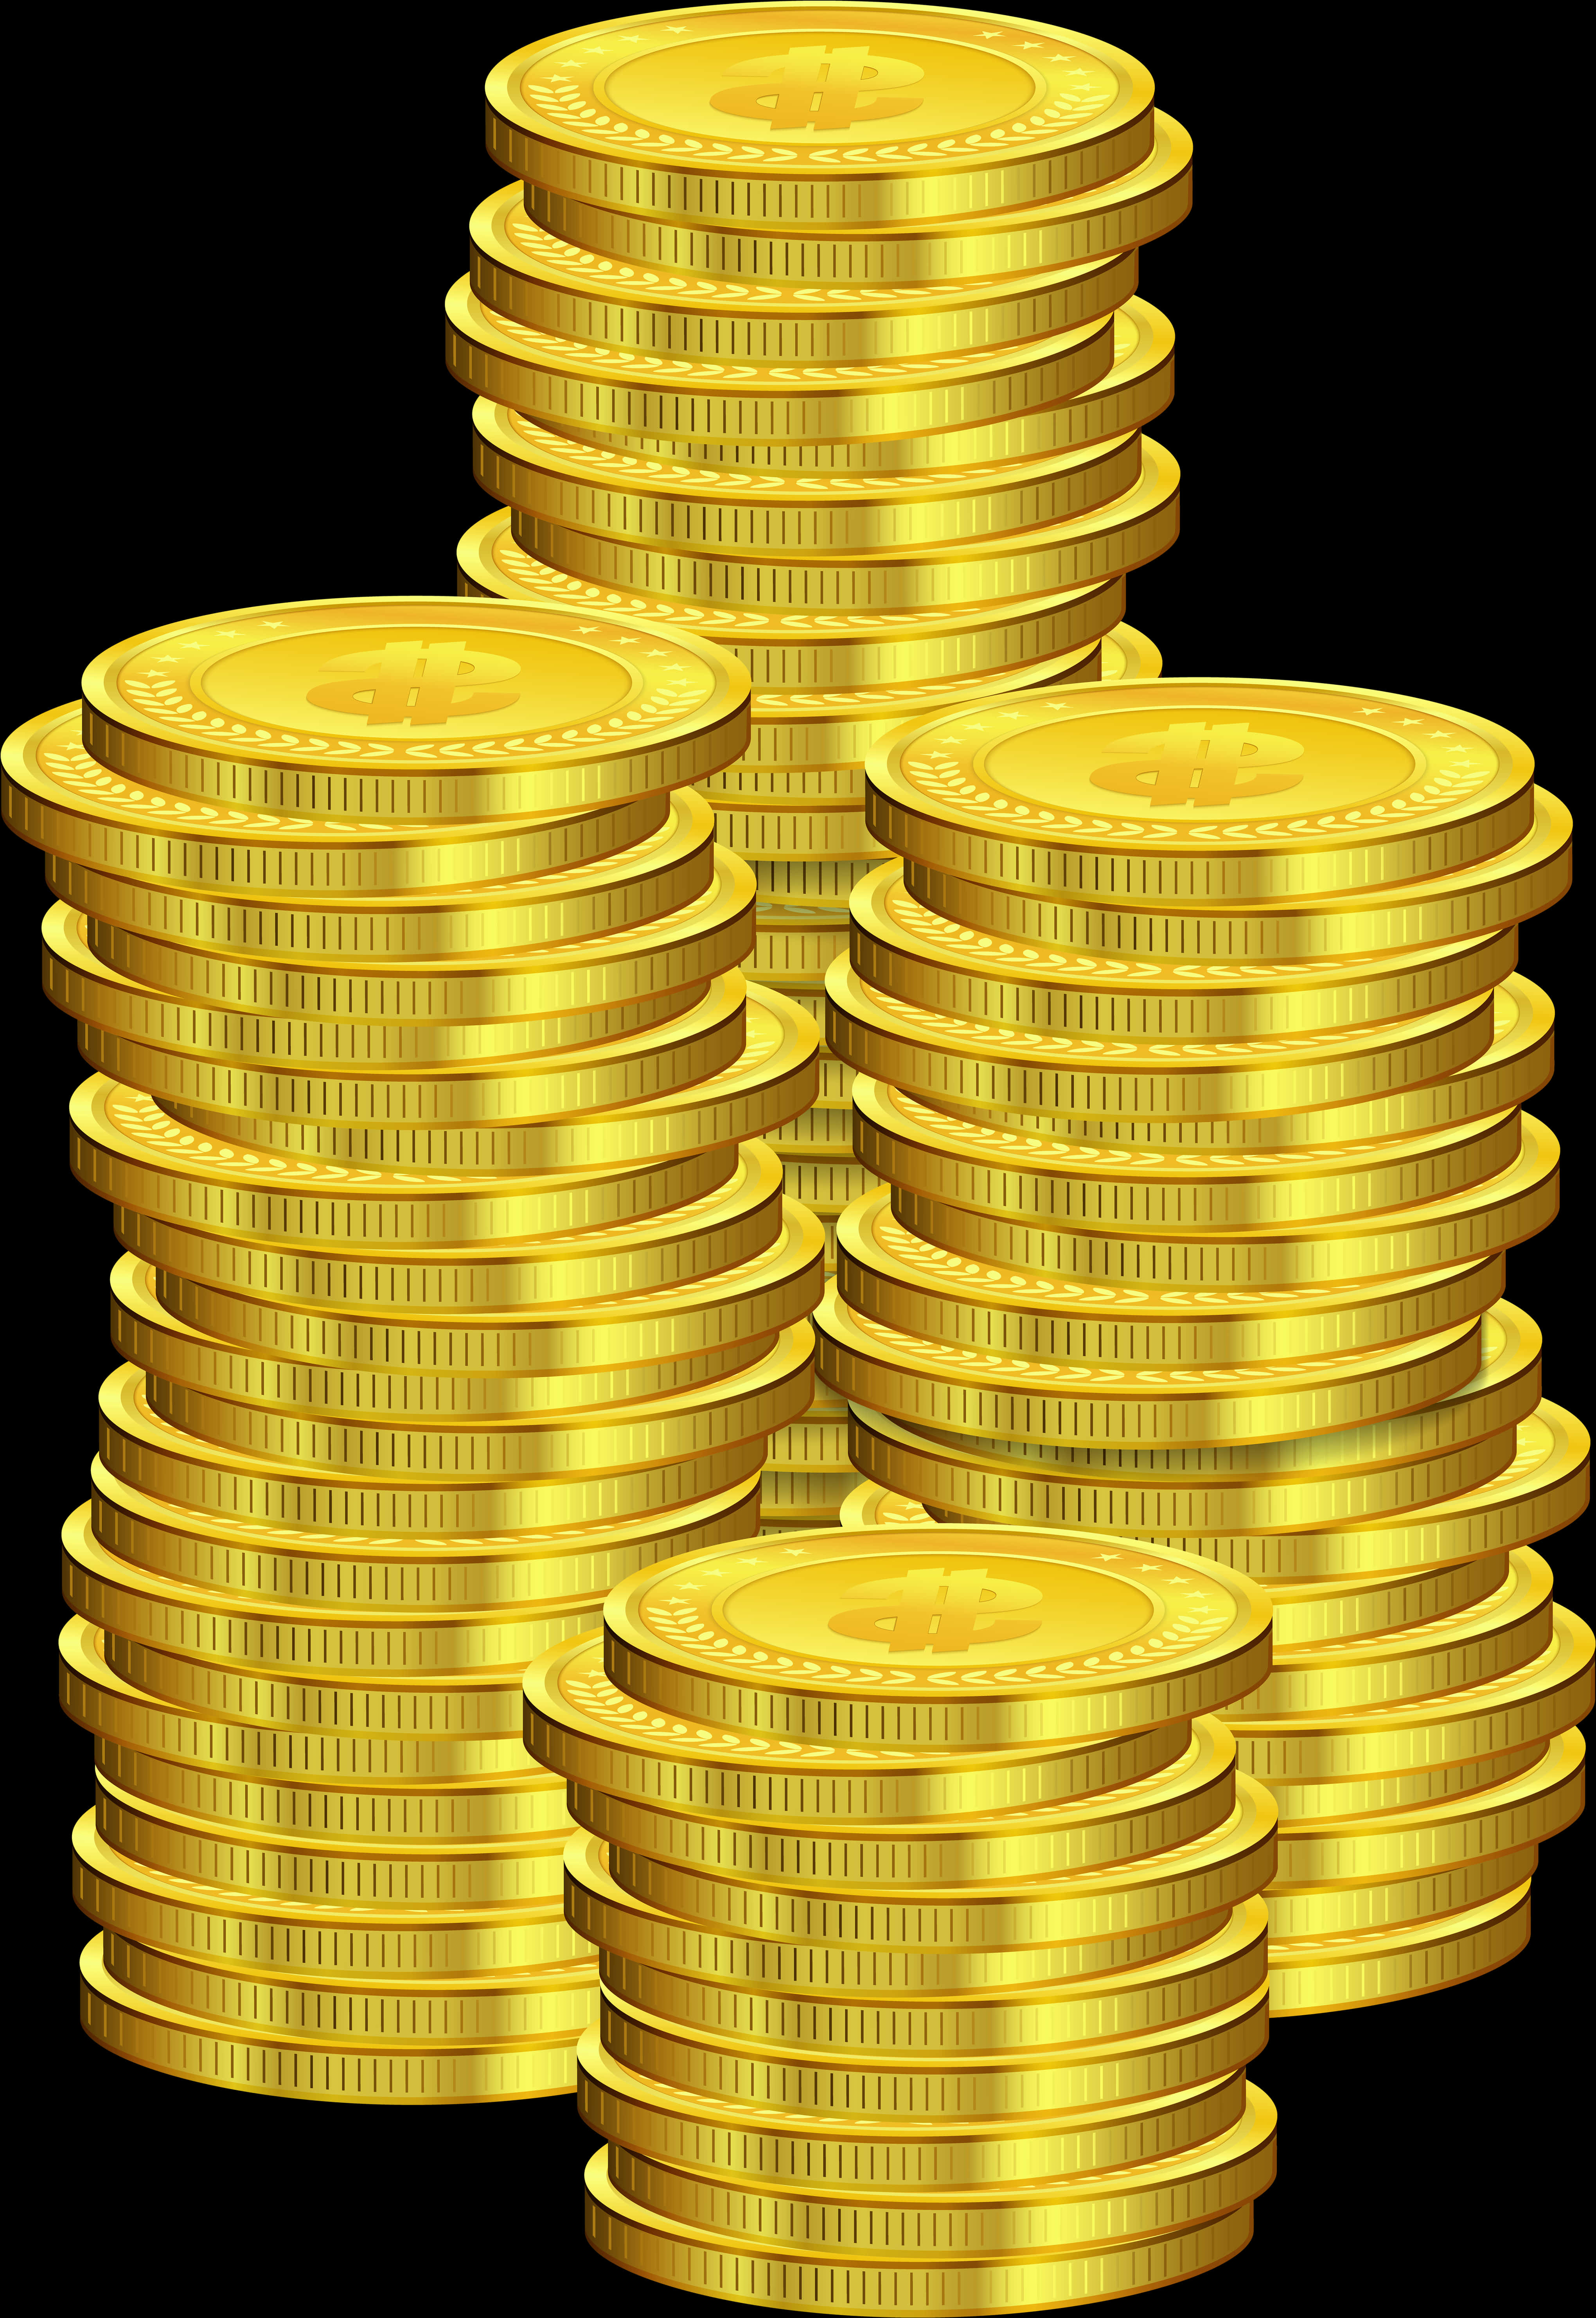 Stacked Gold Coins Illustration PNG